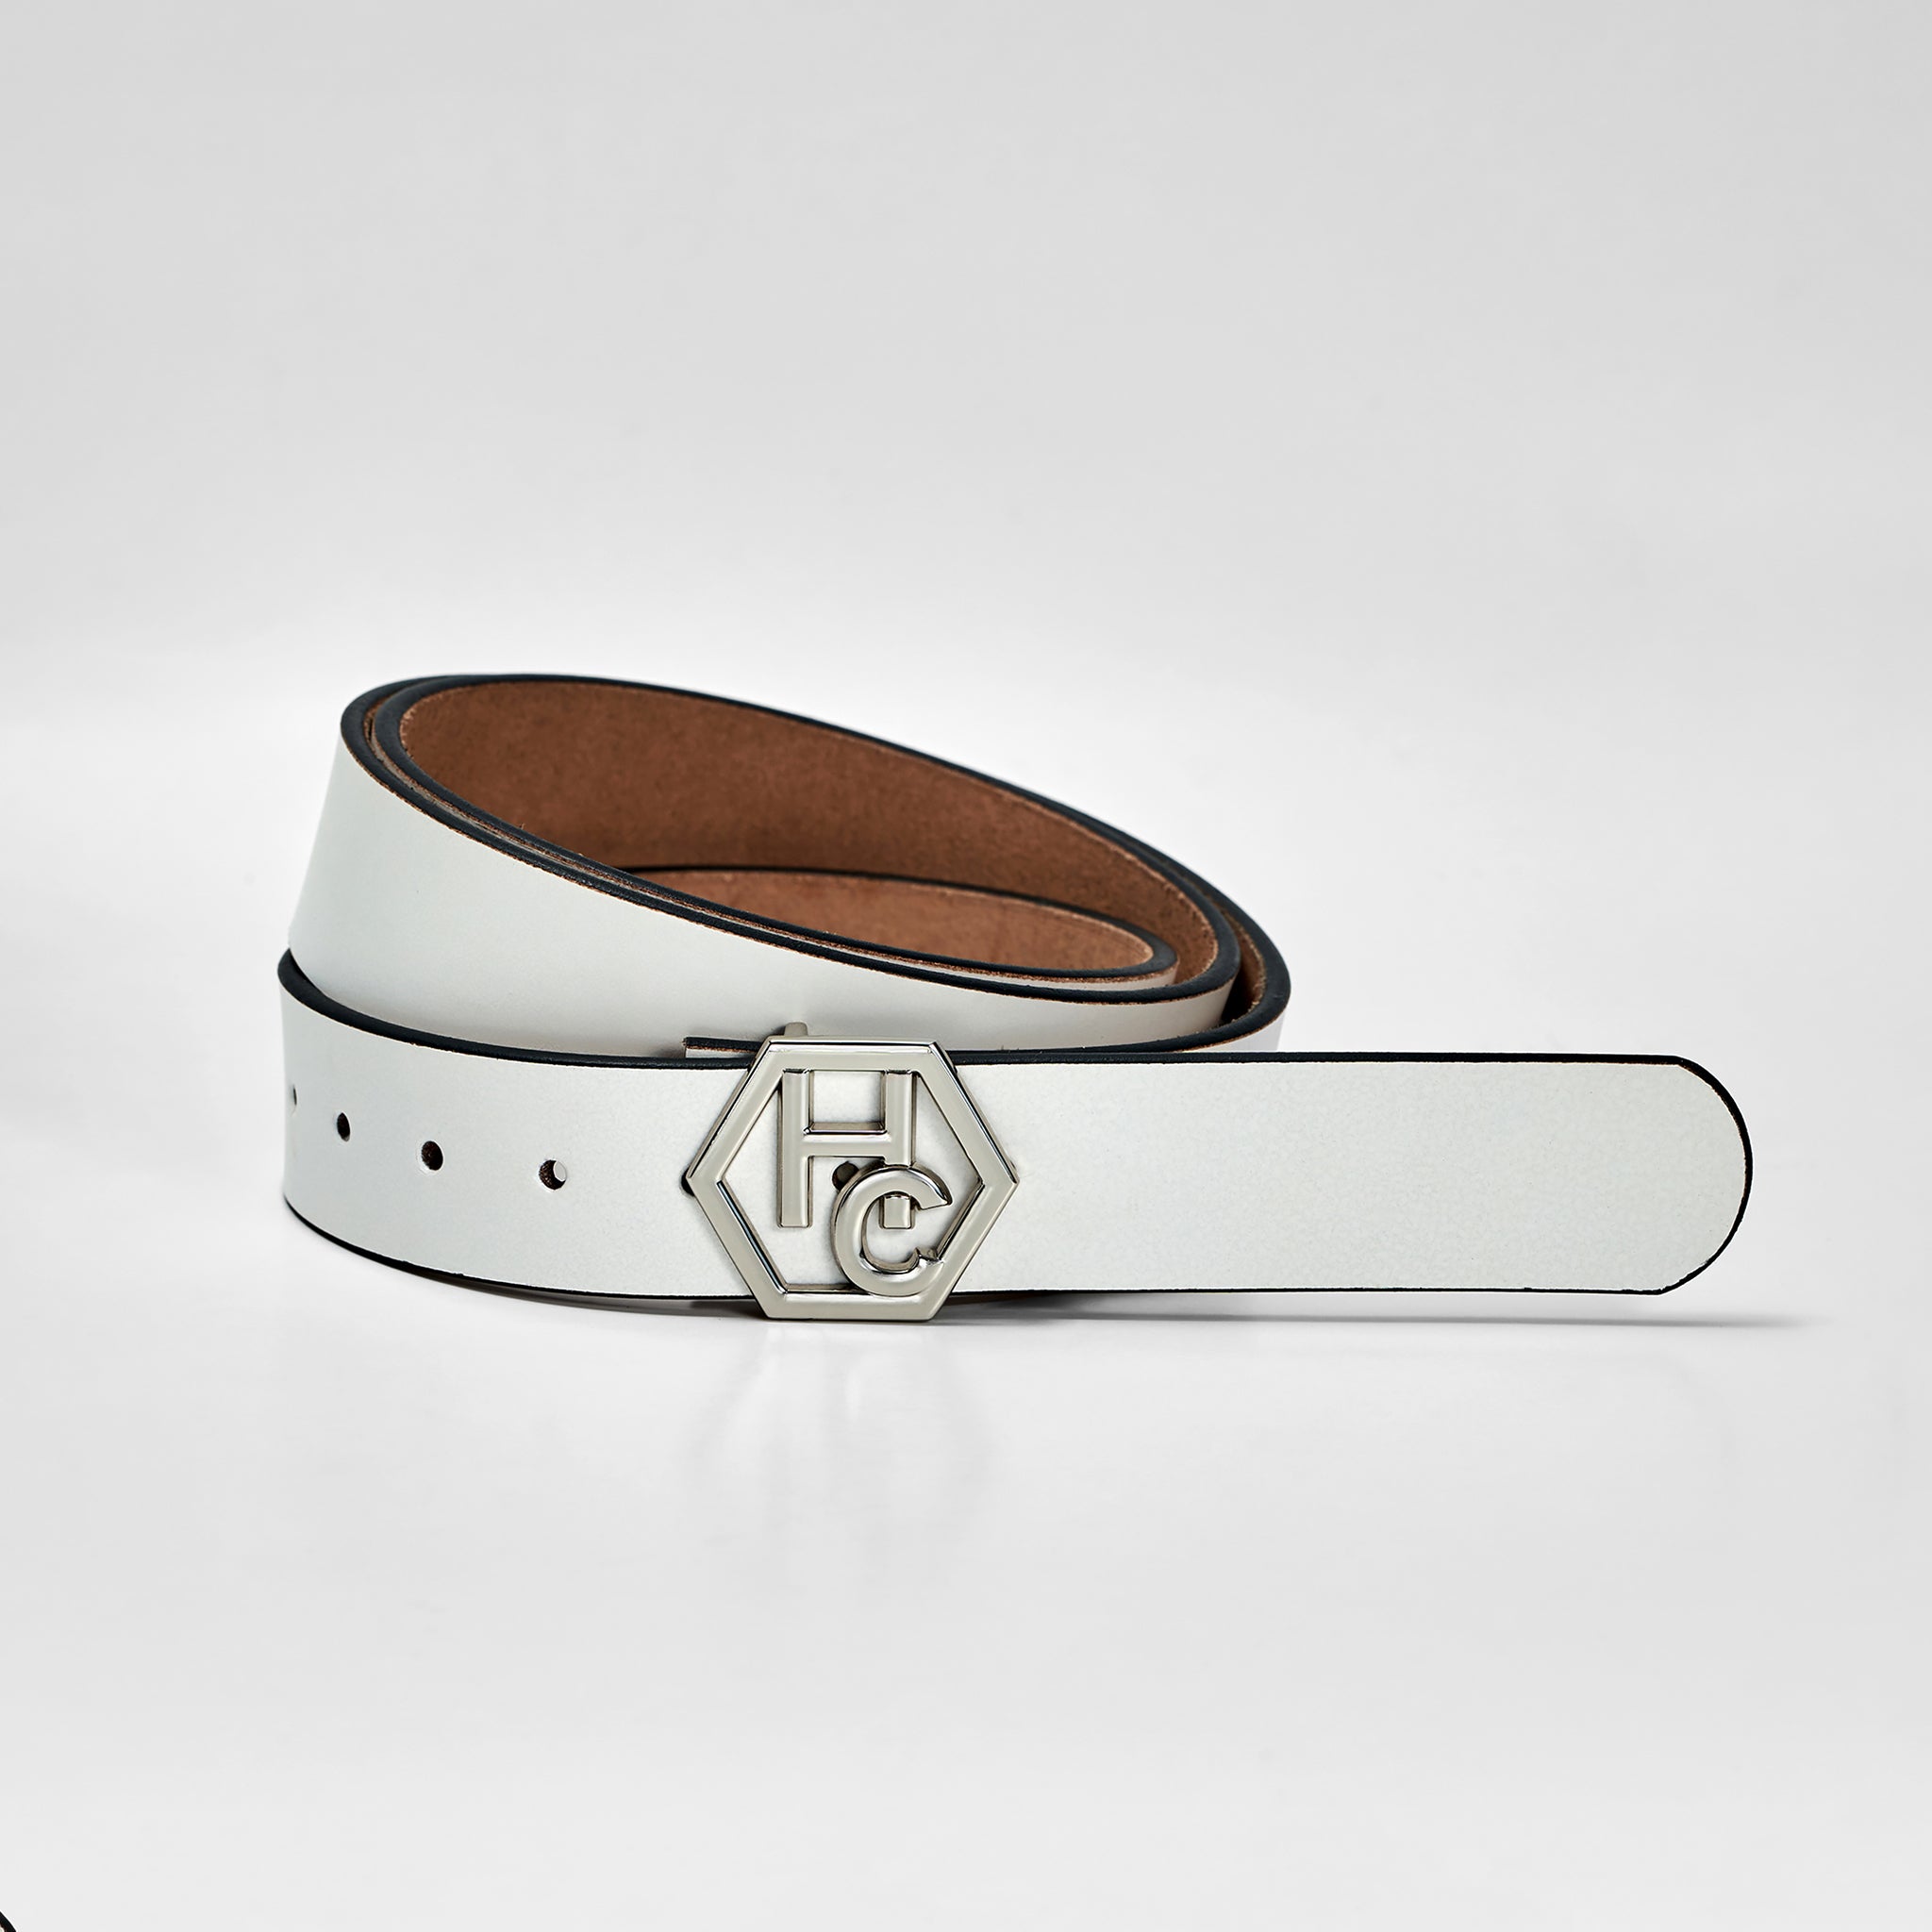 Hedonist Chicago Seamless White Leather Belt 1" 32381371351191